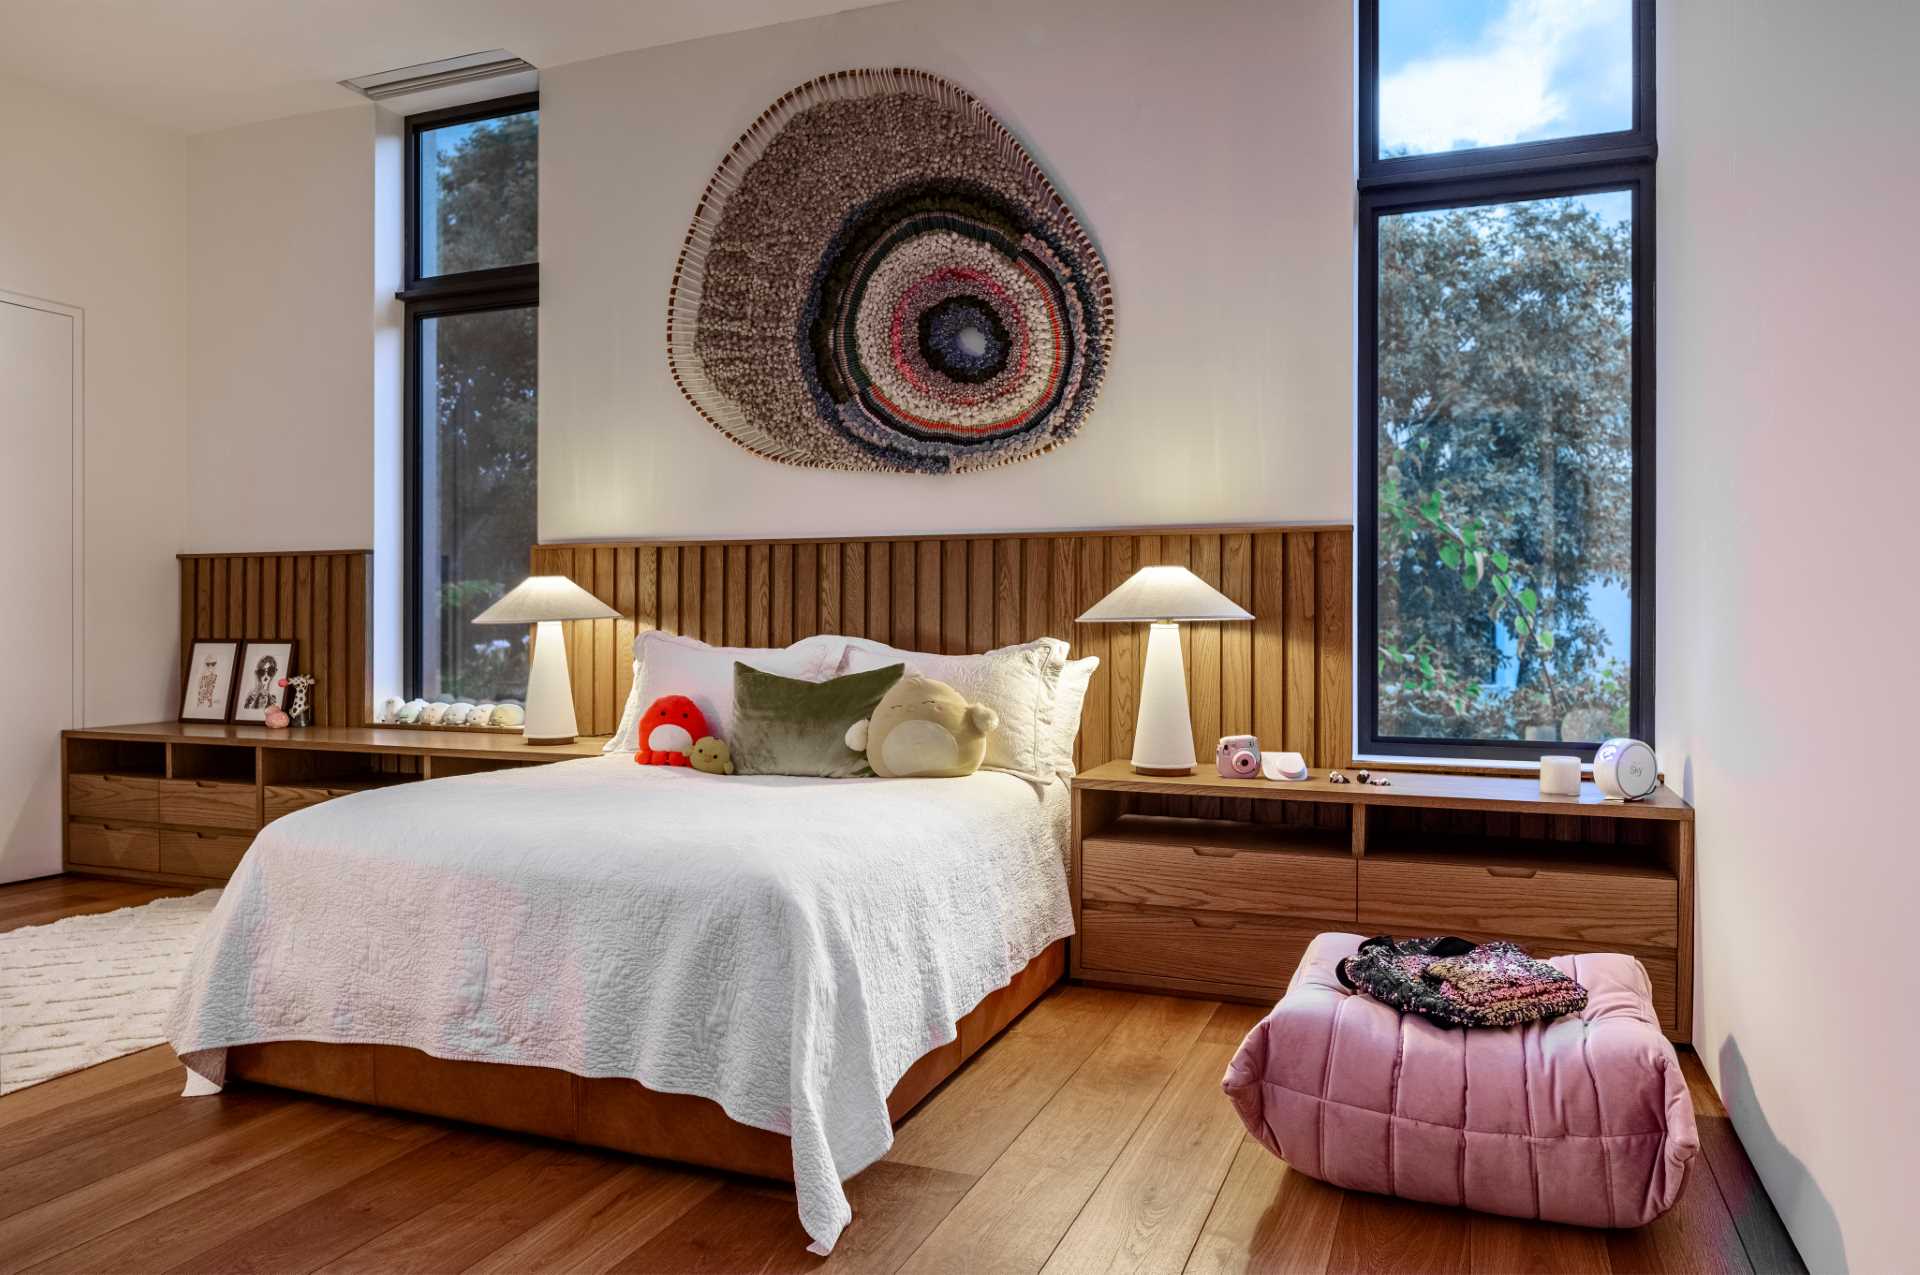 This modern bedroom is furnished with a Togo pouf by Michel Ducaroy and a woven artwork by Tammy Kanat.